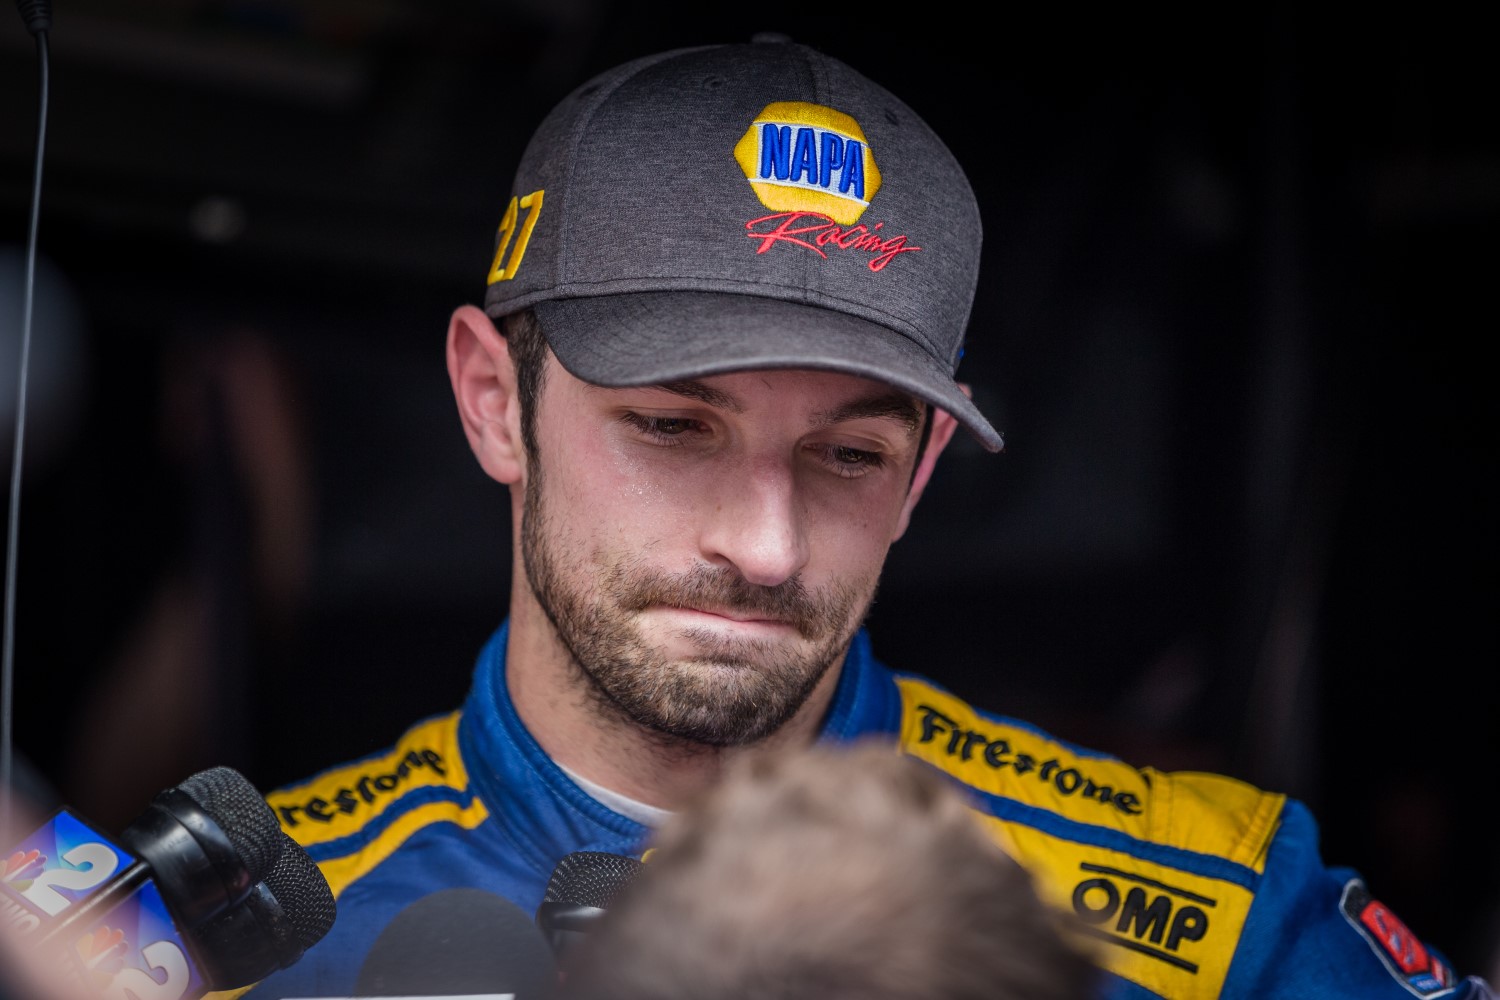 Alexander Rossi was in tears after getting beat by Team Penske in the Indy 500. Imagine how he'll fell everytime McLaughlin wins the 500 in the ride he turned down